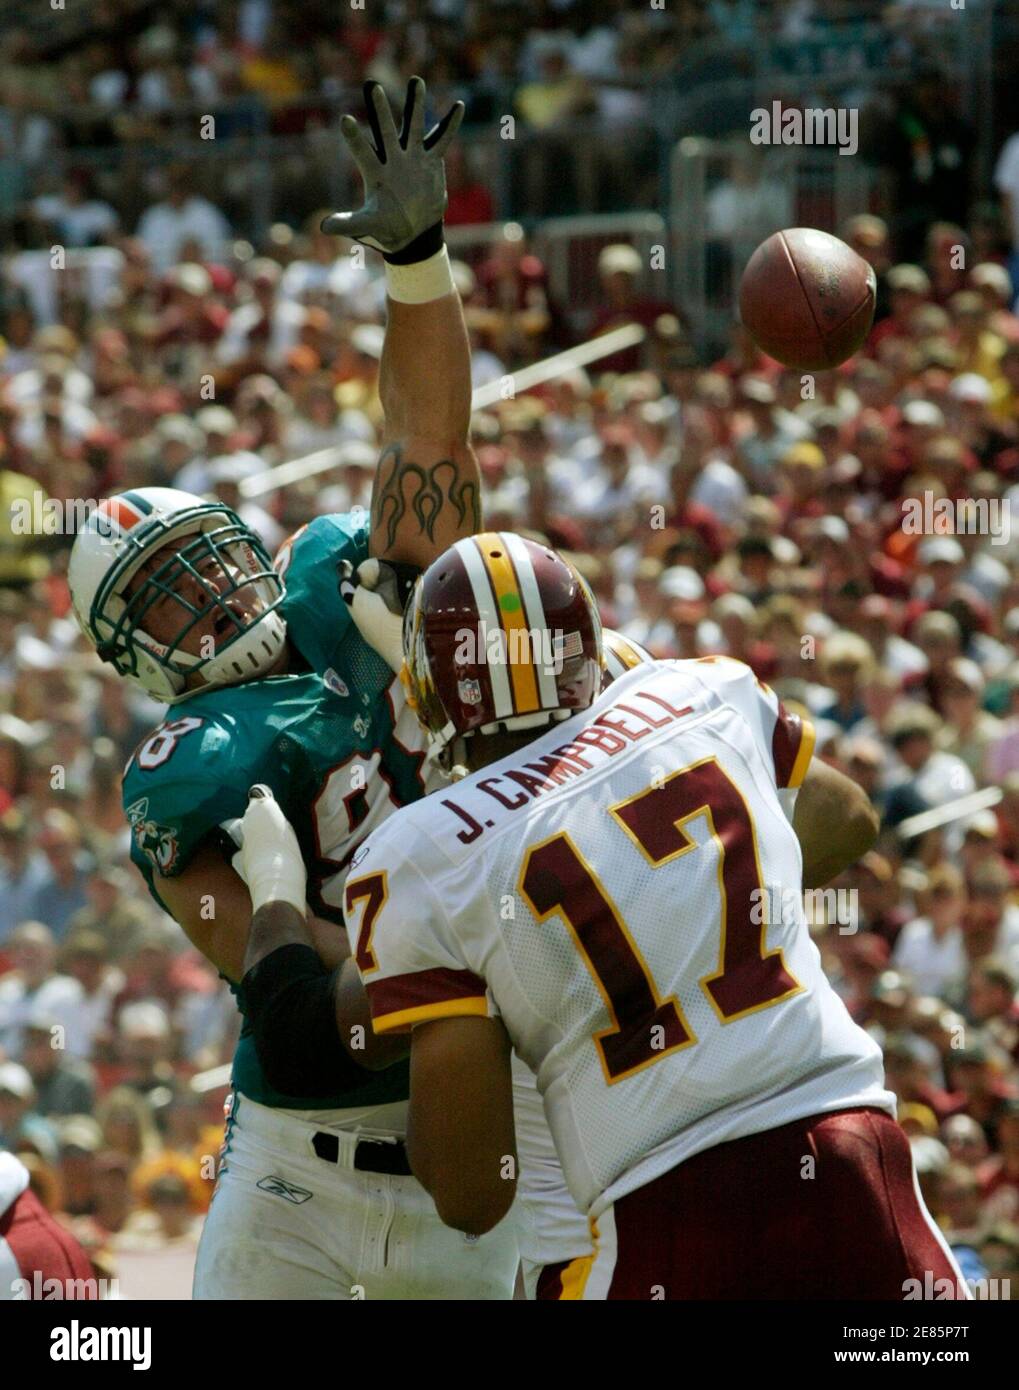 Washington Redskins quarterback Jason Campbell (17) throws against the pass rush of Miami Dolphins defensive end Matt Roth in the first half of their NFL football game in Landover, Maryland, September 9, 2007.    REUTERS/Gary Cameron  (UNITED STATES) Stock Photo